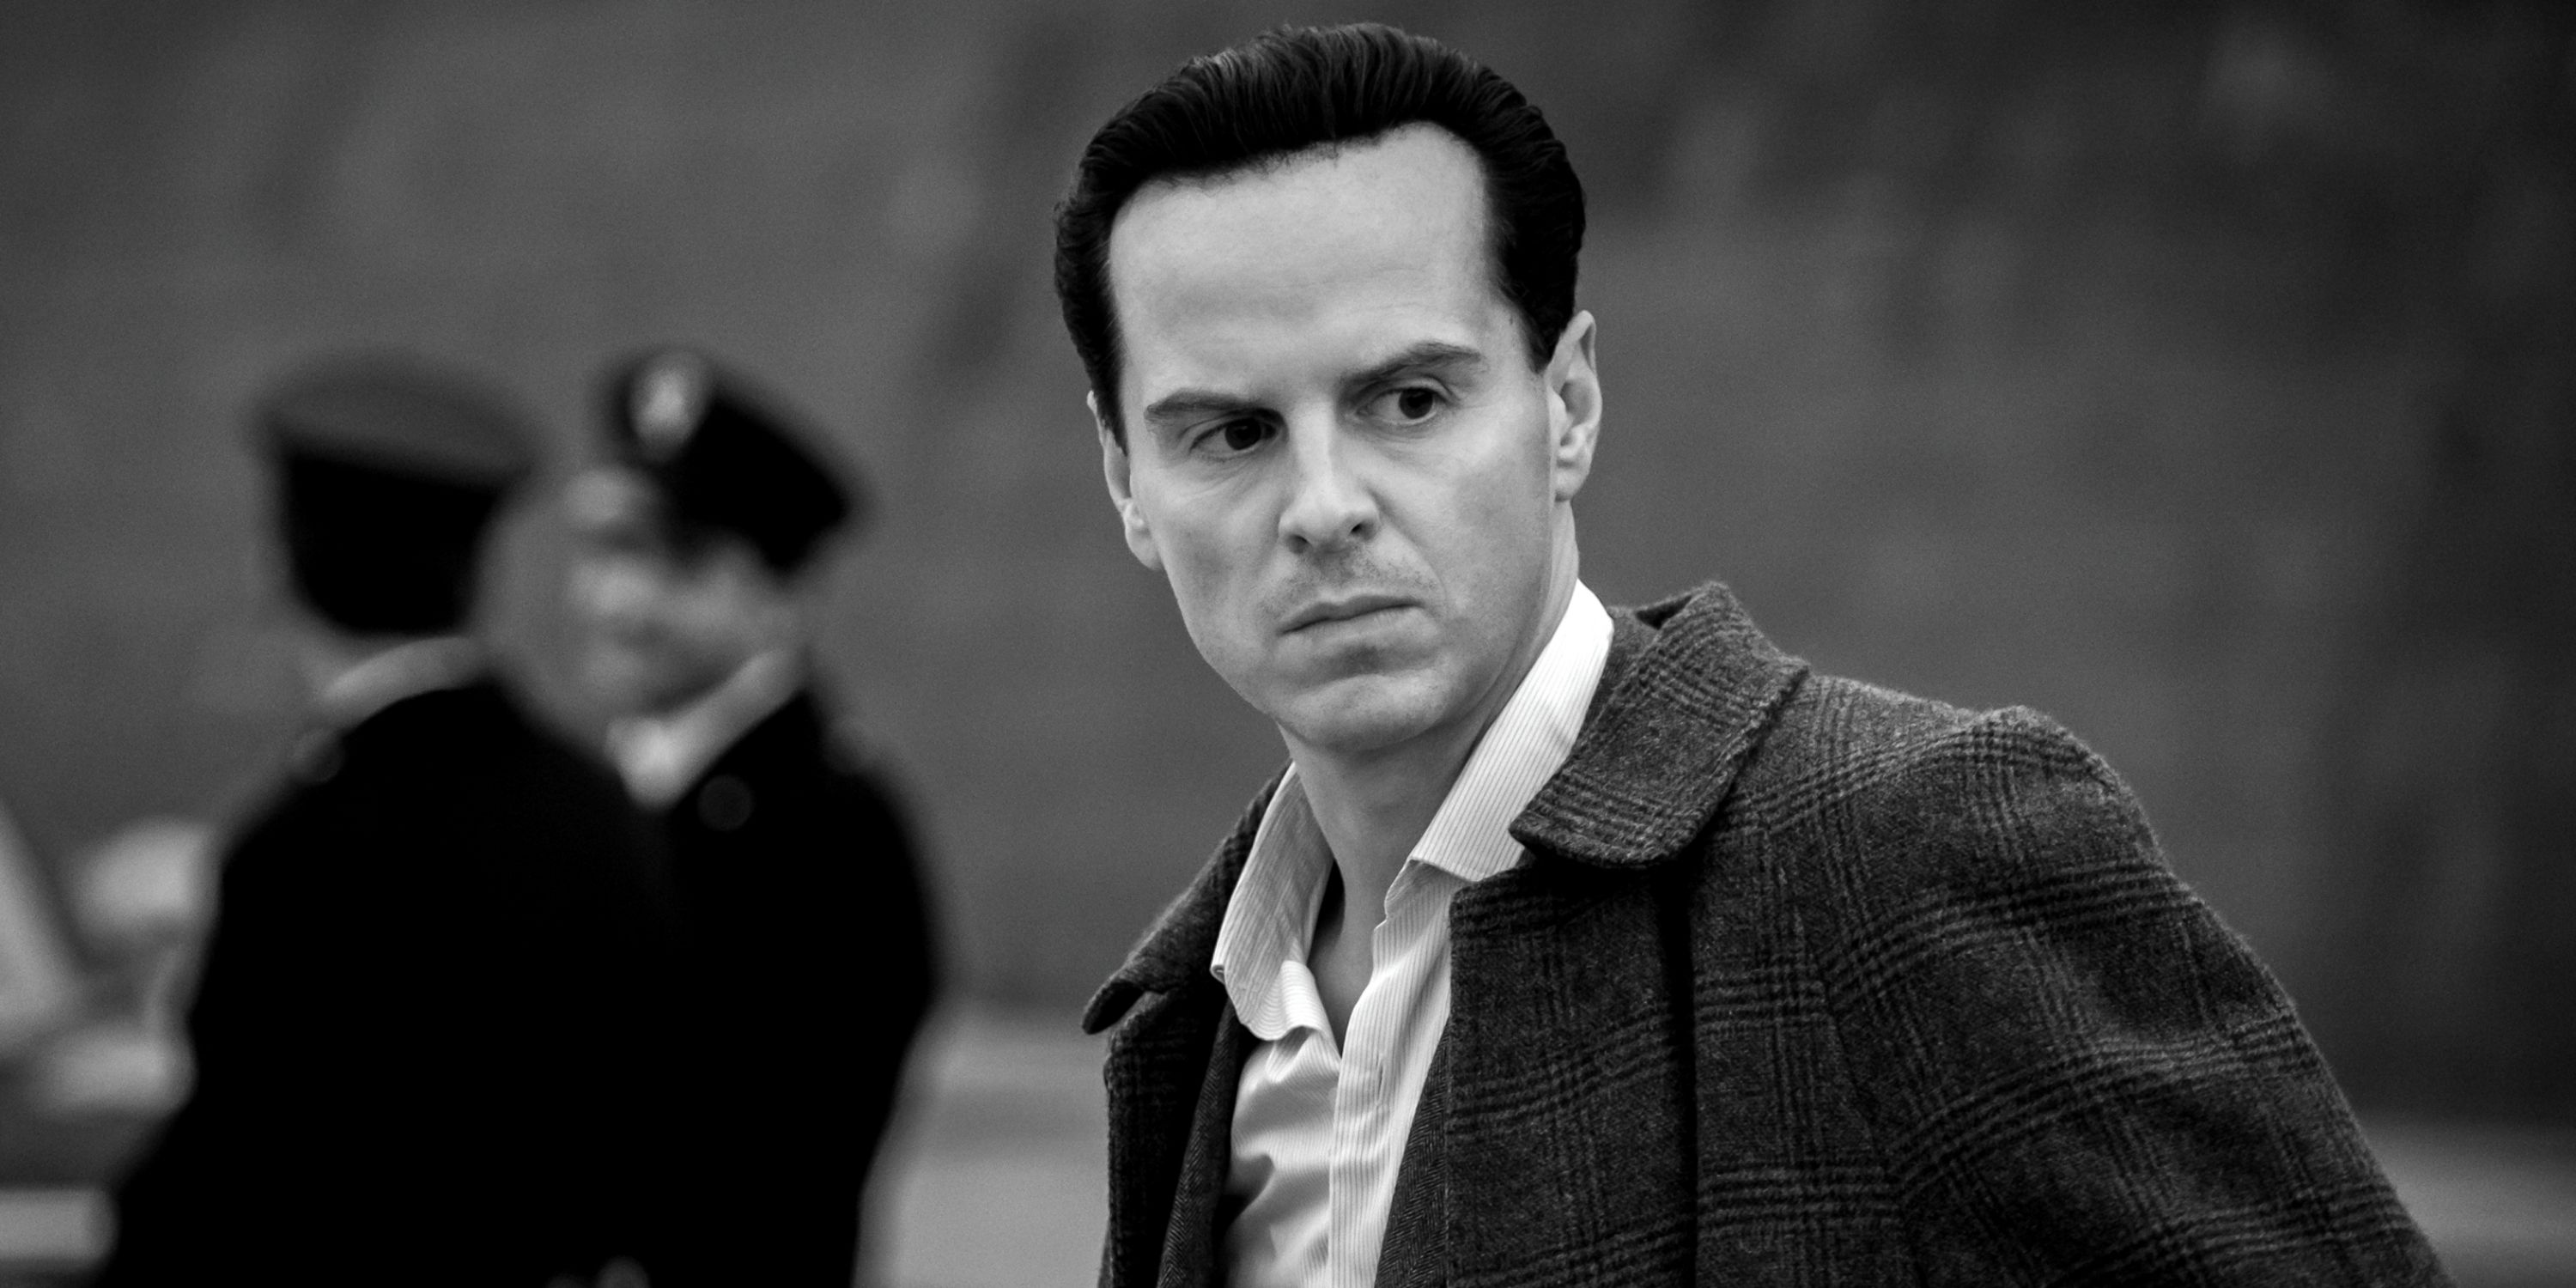 Andrew Scott as Tom Ripley in close-up in Episode 7 of Netflix's Ripley